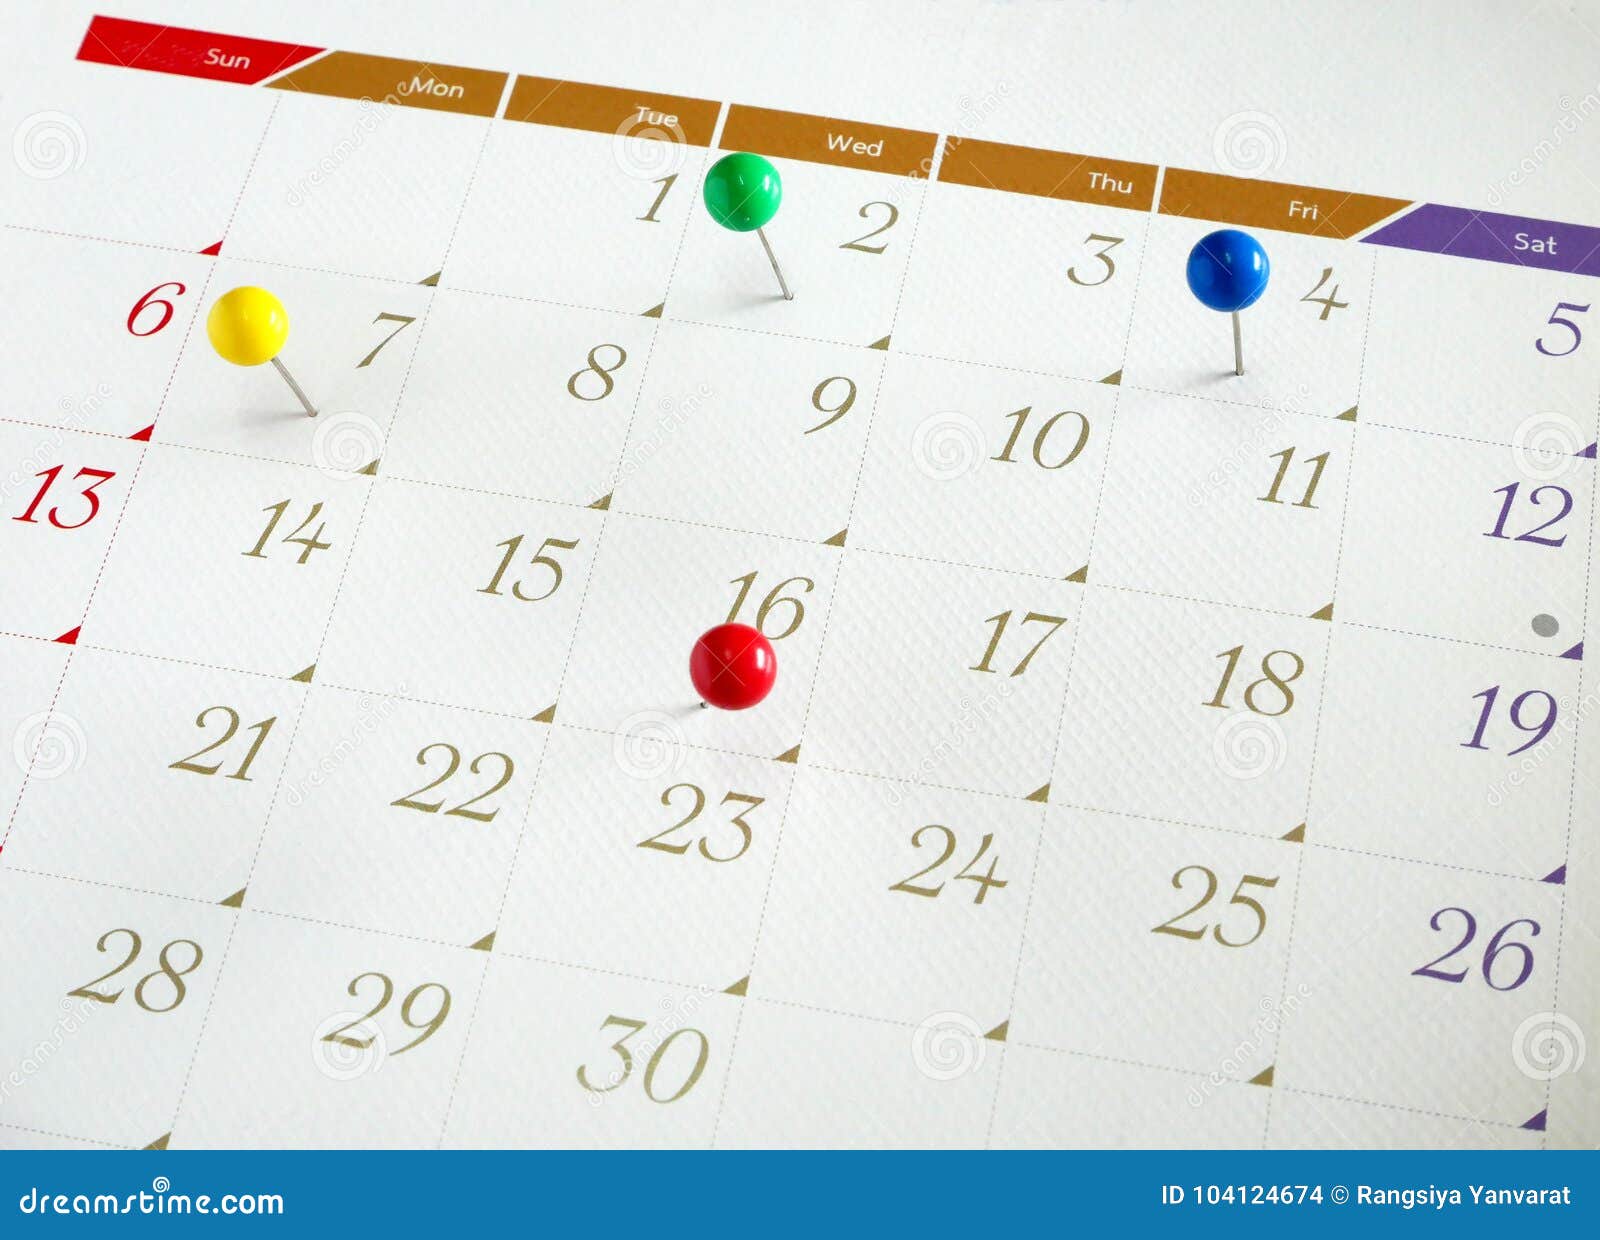 events calendar stock photo. Image of planning 104124674